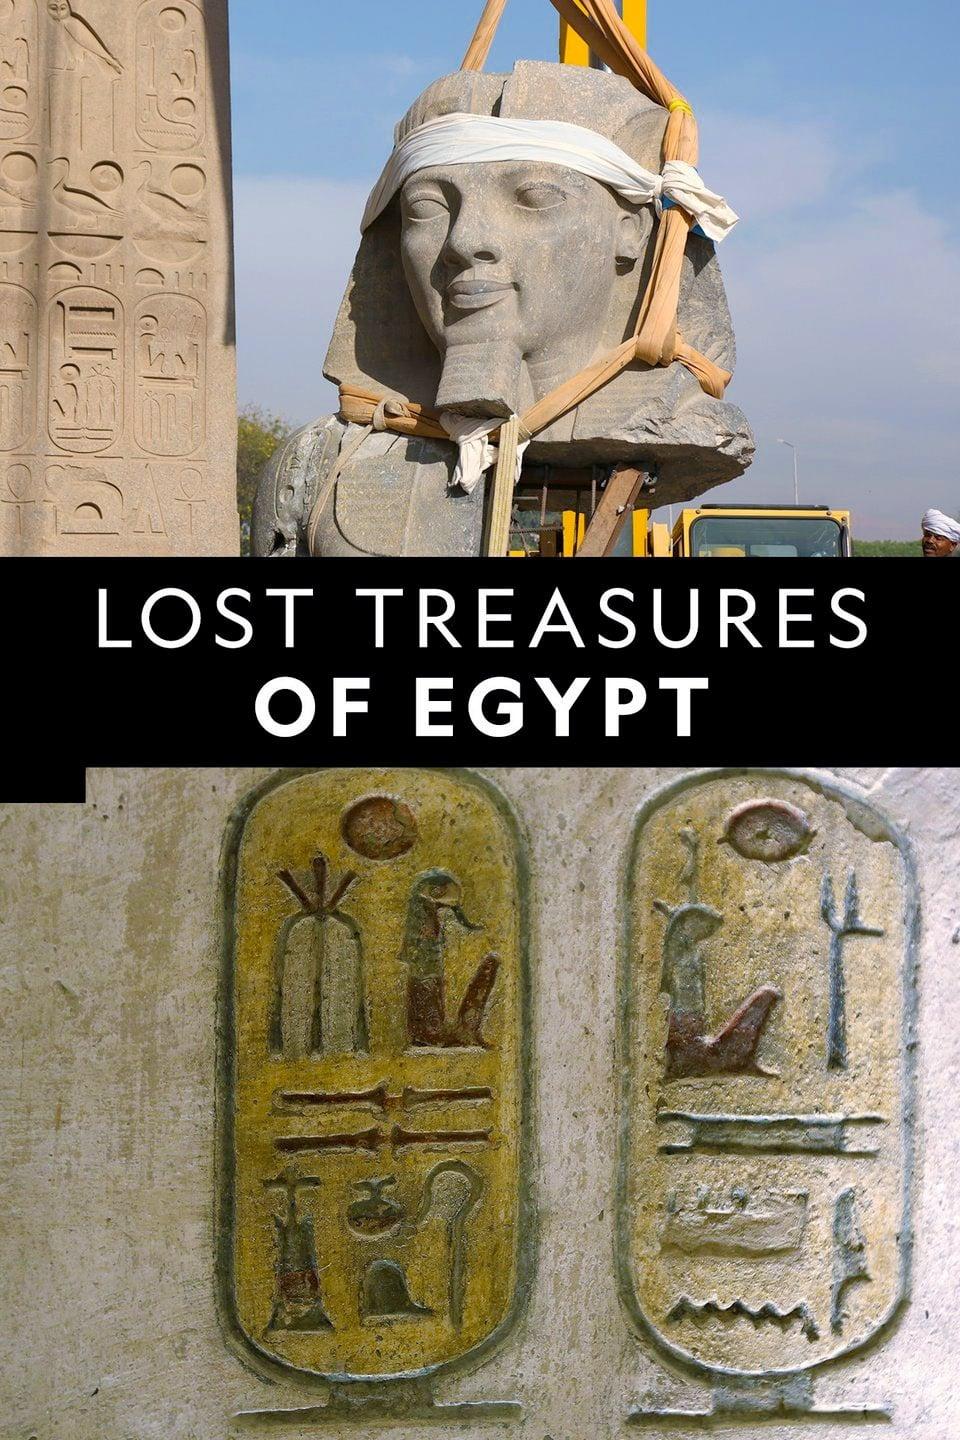 Lost Treasures of Egypt poster